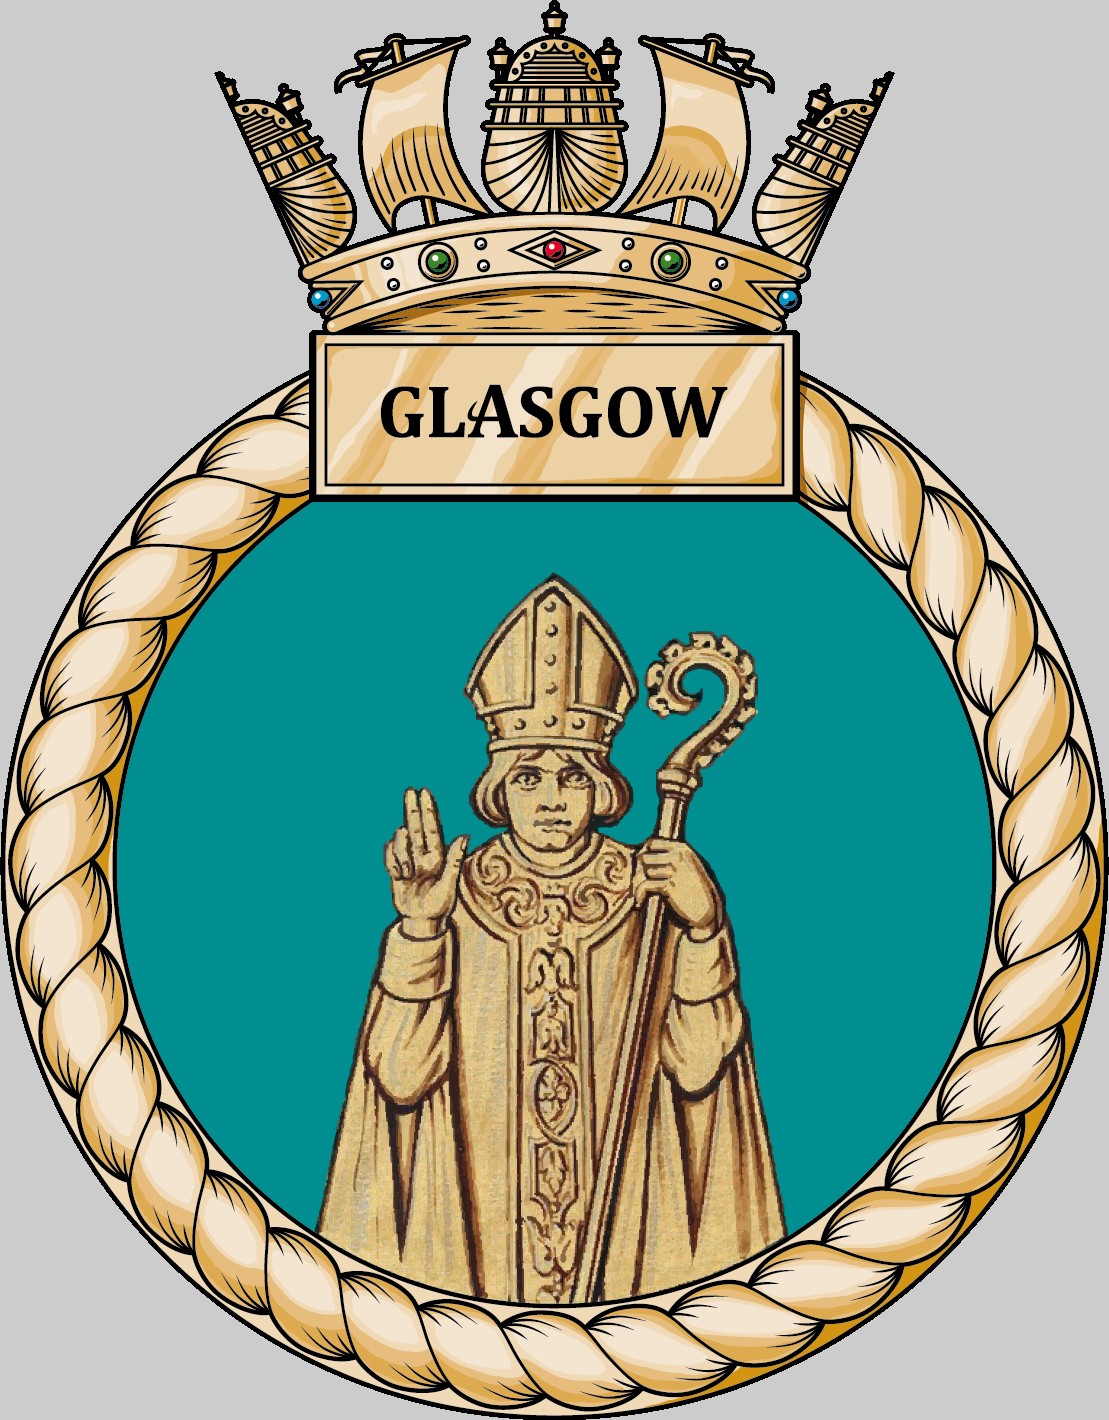 f-88 hms glasgow insignia crest patch badge type 26 city class frigate global combat ship royal navy 02x